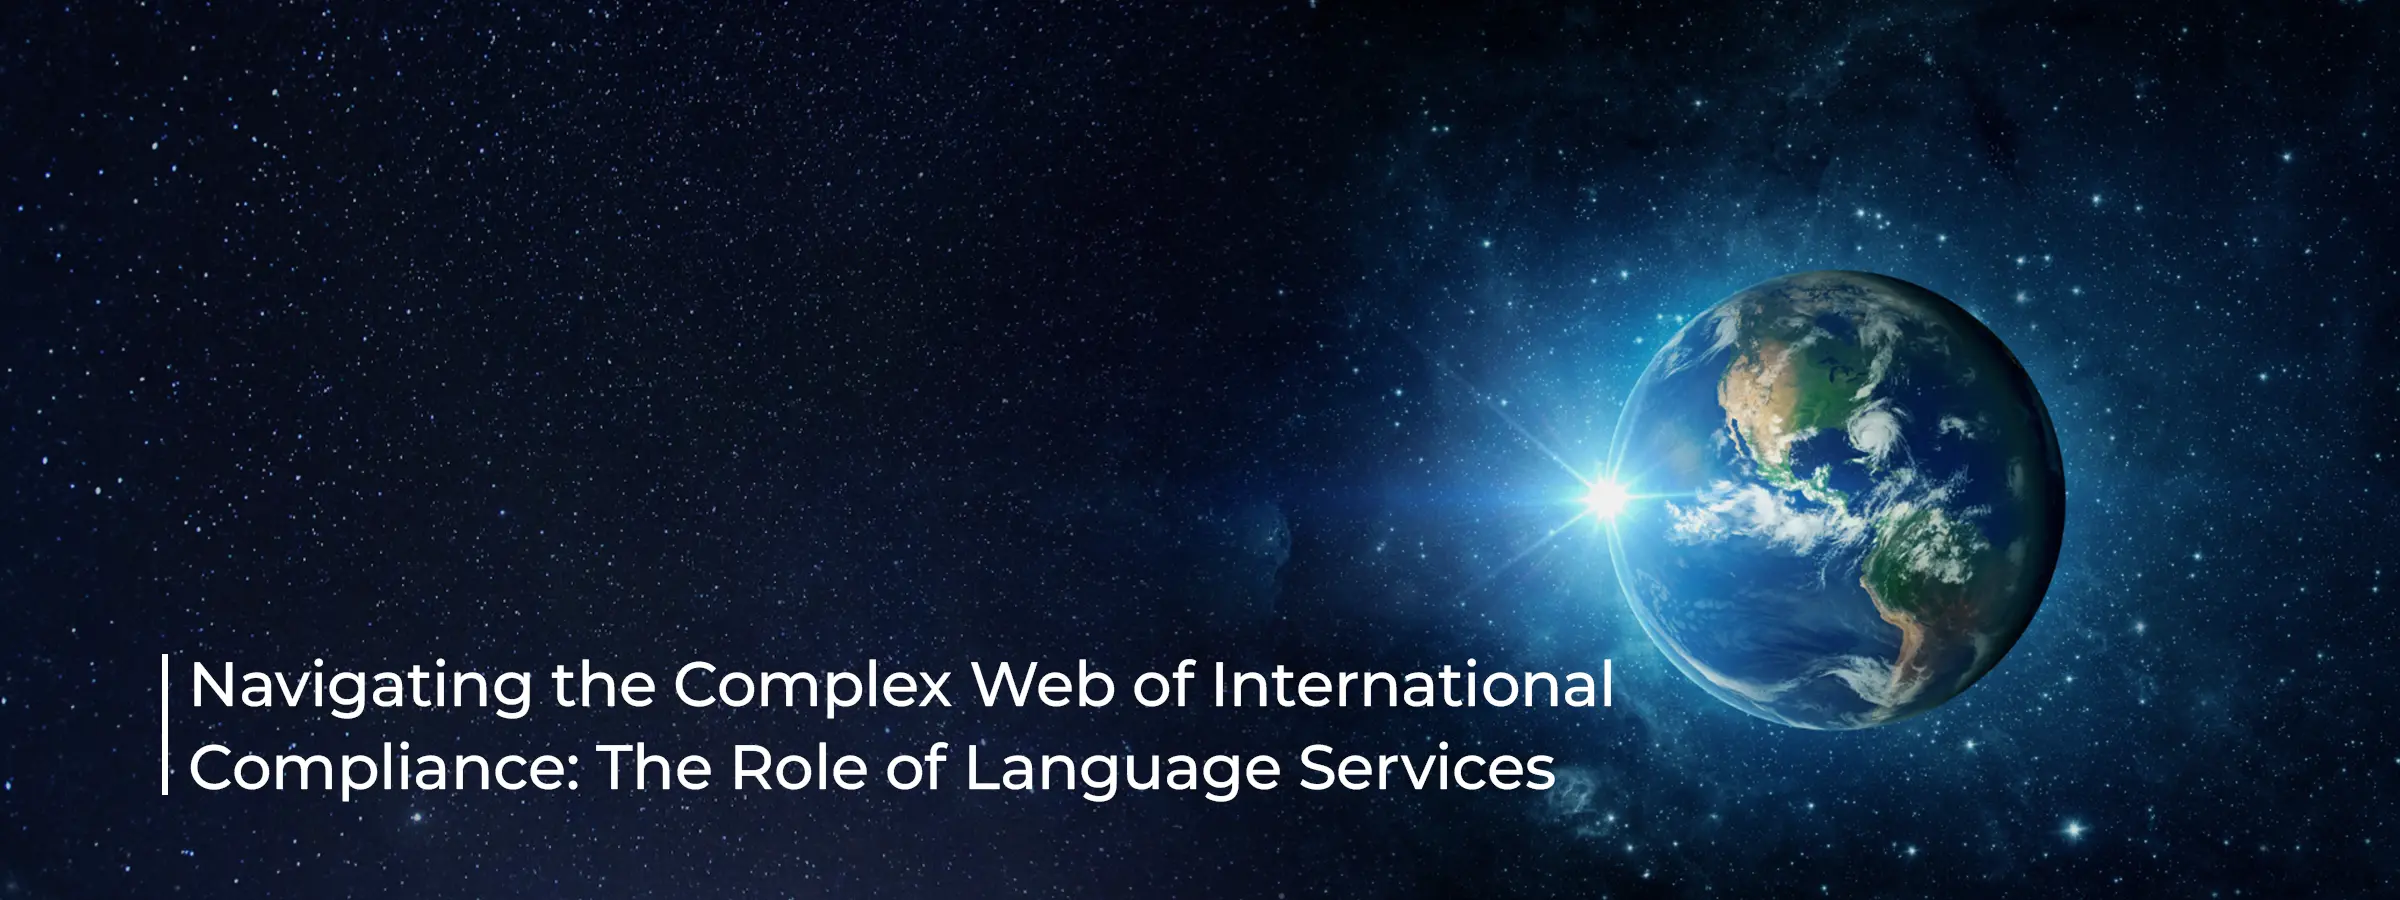 navigating-the-complex-web-of-international-compliance